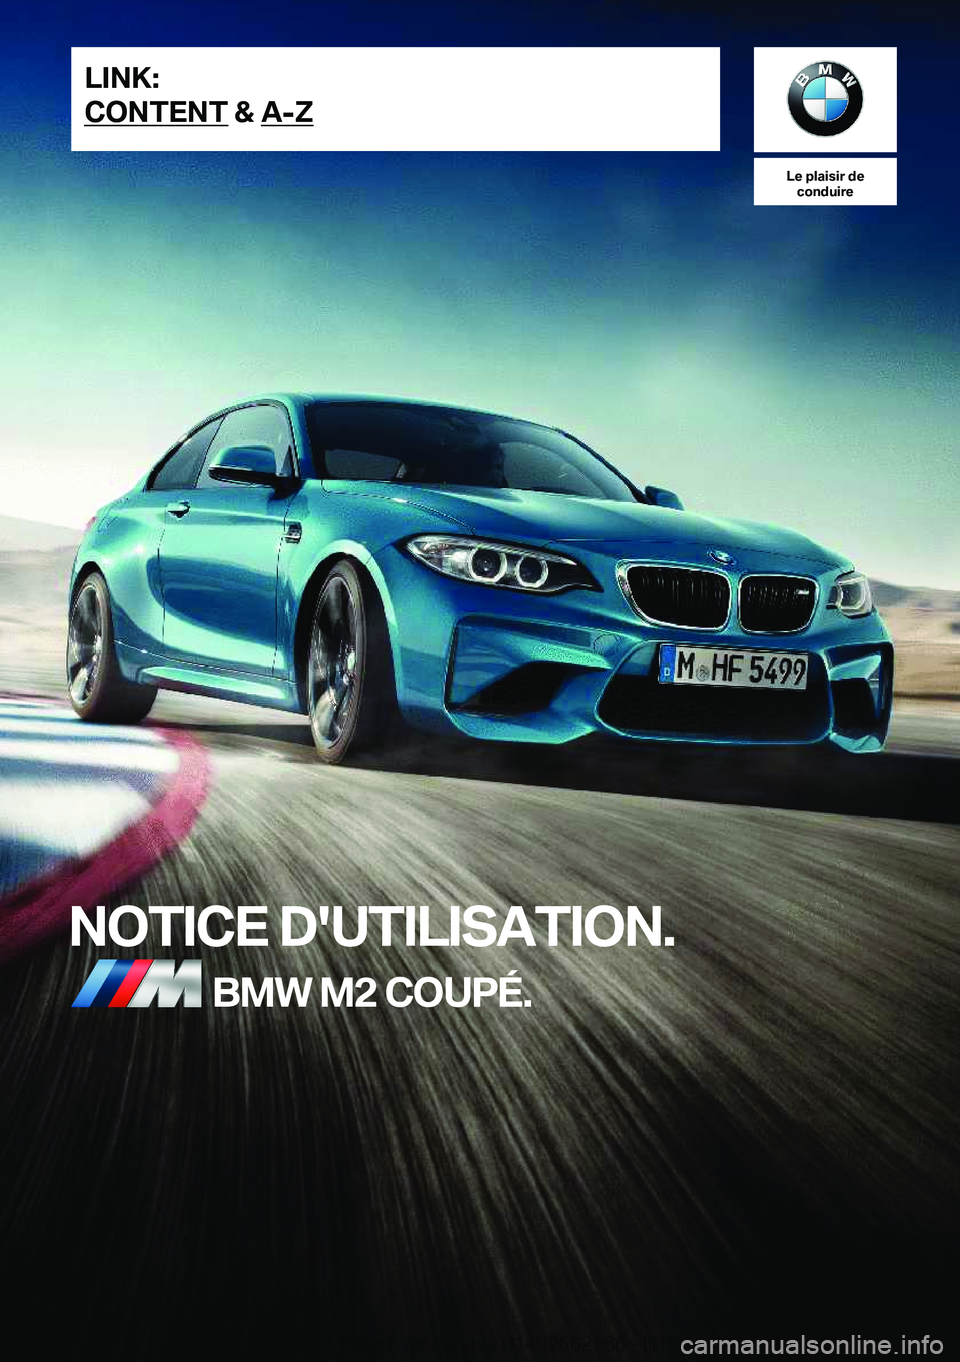 BMW M2 2018  Notices Demploi (in French) �L�e��p�l�a�i�s�i�r��d�e�c�o�n�d�u�i�r�e
�N�O�T�I�C�E��D�'�U�T�I�L�I�S�A�T�I�O�N�.�B�M�W��M�2��C�O�U�P�É�.�L�I�N�K�:
�C�O�N�T�E�N�T��&��A�-�;�O�n�l�i�n�e� �E�d�i�t�i�o�n� �f�o�r� �P�a�r�t�